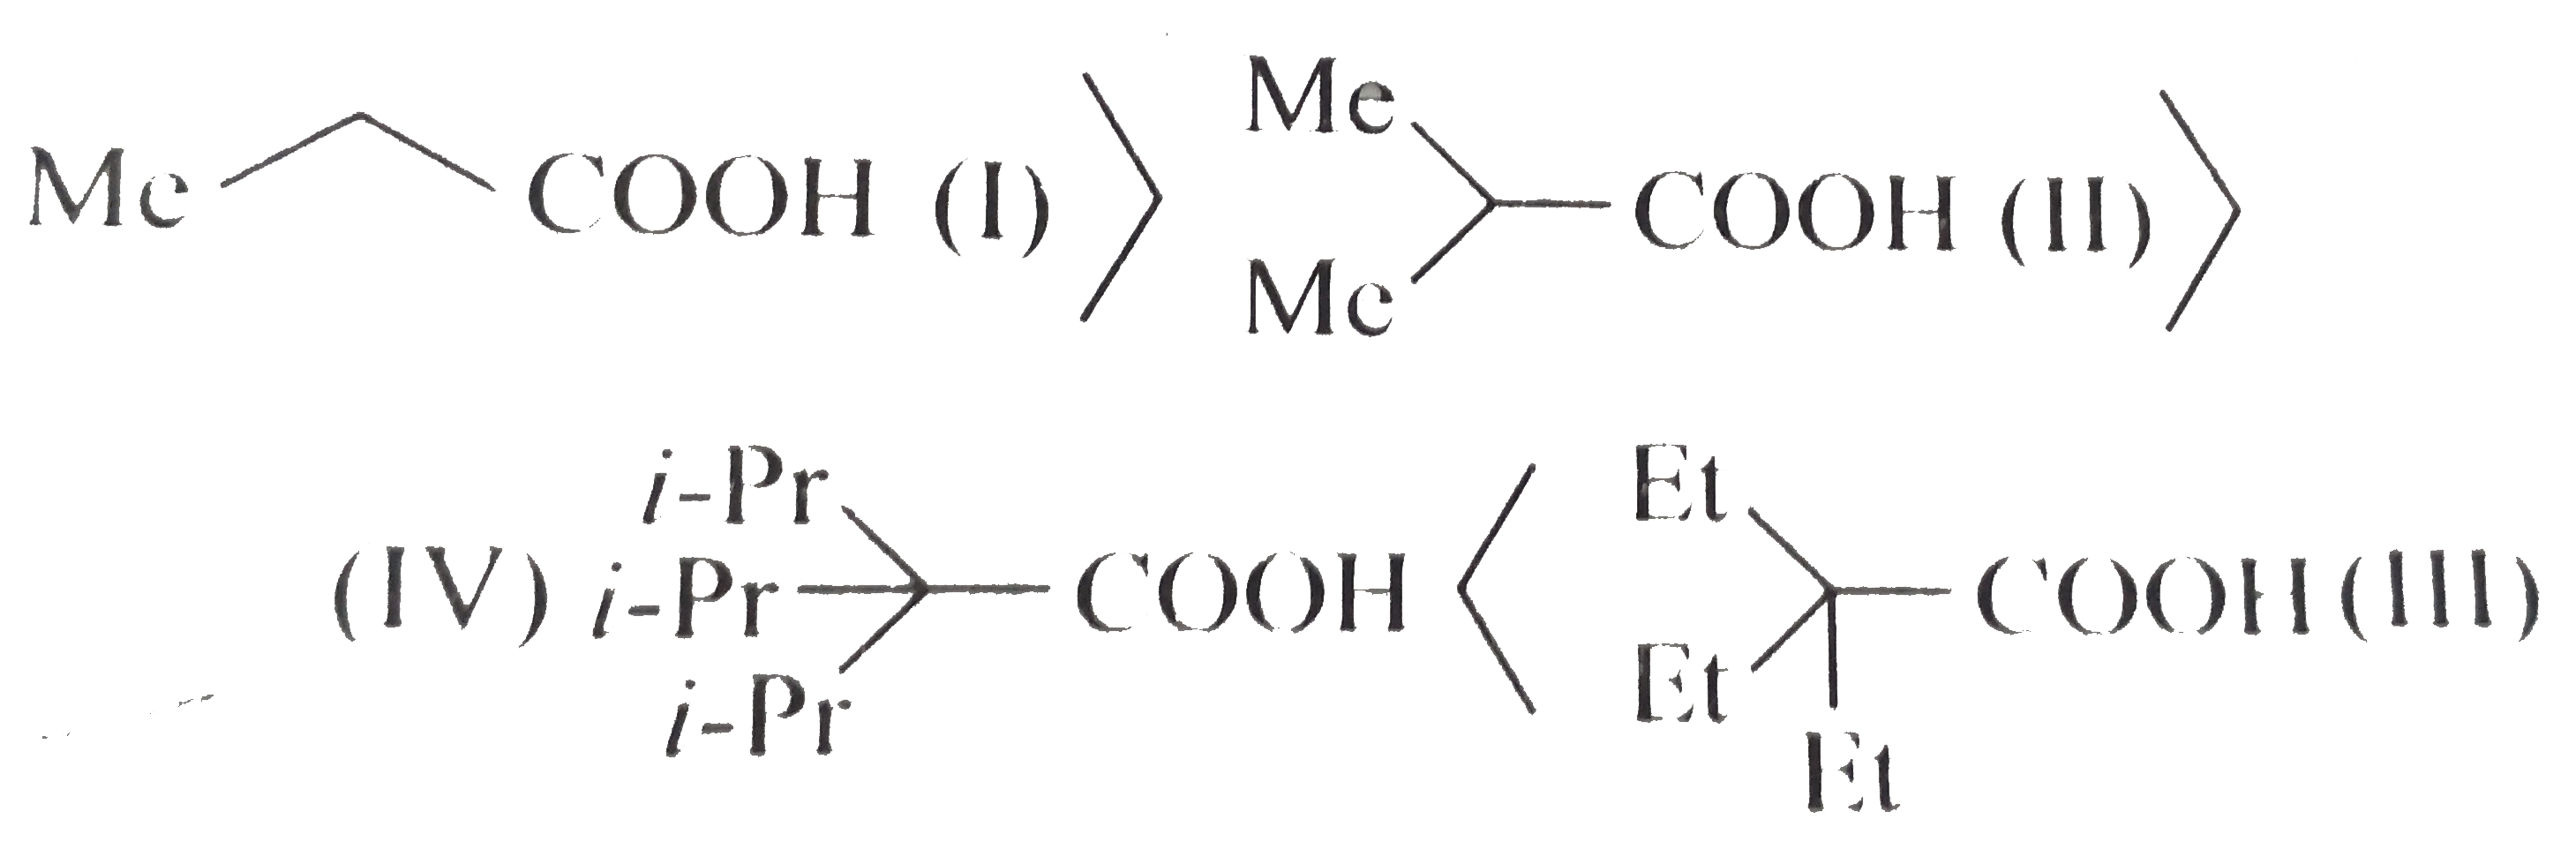 Explain the following :   (a) Esters can be prepared by the reaction of RCOOH and R'X in basic medium. Why is this method not suitable for the preparation of t-butyl ethanoate ?   (b) How is t-butyl ethanoate prepared ?   ( c) Explain the rate esterification of the following acids with MeOH.      (d) Why cannot HCl be used for the conversion of RCOOH to RCOCl ?   ( e) Why can esters be prepared more efficiently by the squence : RCOOH rarr RCOCl rarr RCOOR', rather than RCOOH rarr RCOOR' ?   (f) Why are acyl azides less reactive than ROCOCl but a little more reactive than anhydride ?   Ka of N3 H = 2.6 xx 10^-5 and Ka of CH3 COOH = 1.8 xx 10^-5.